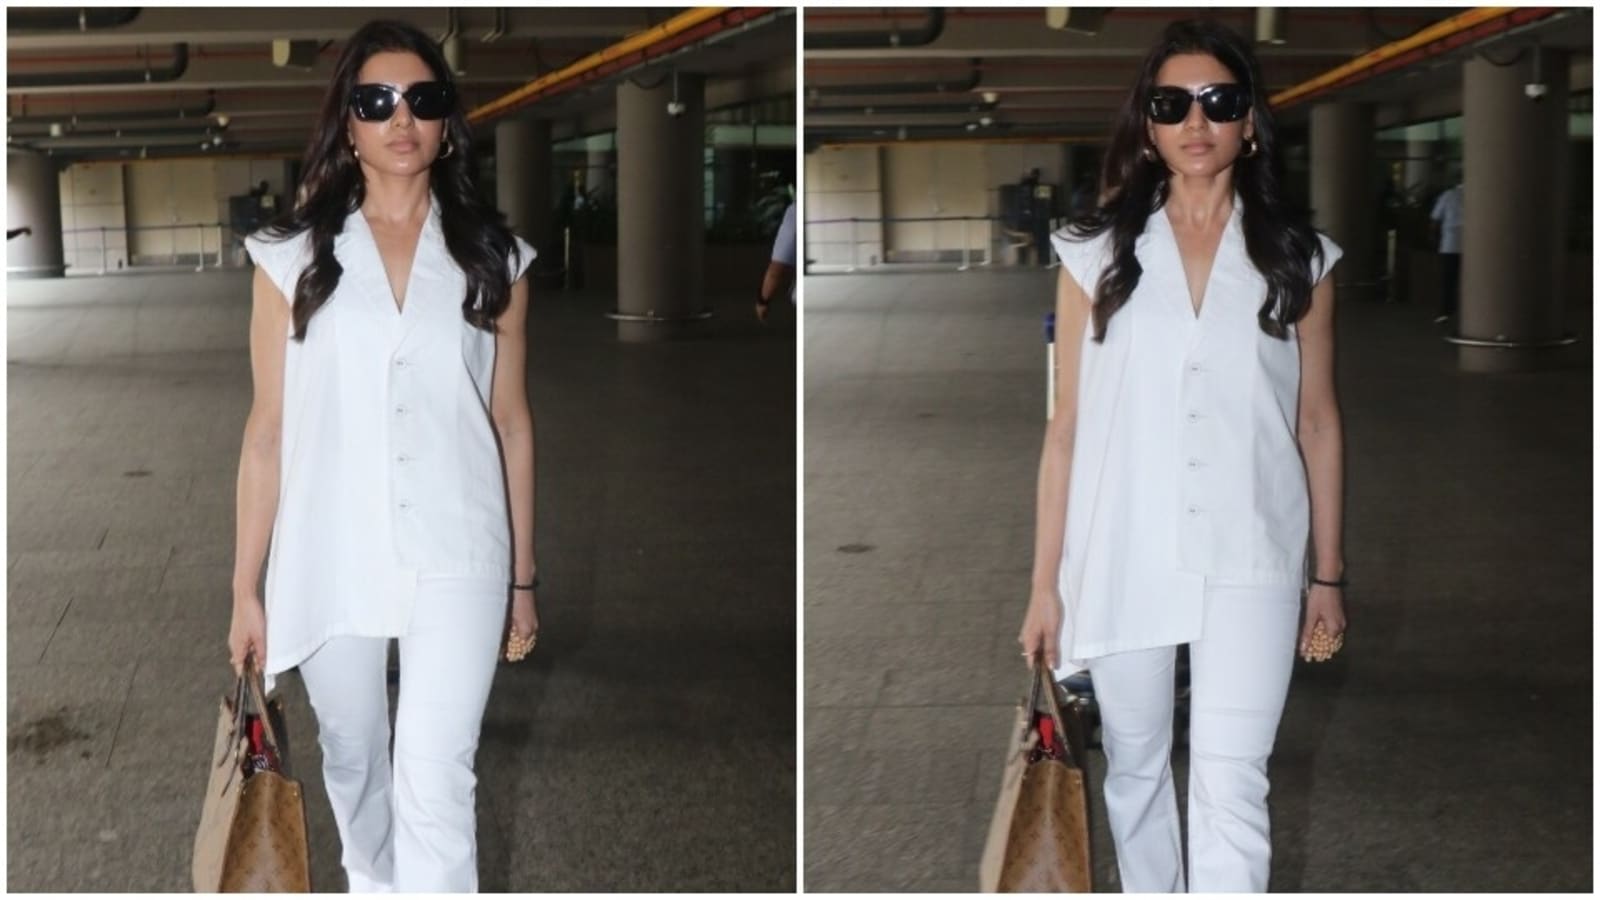 Samantha Ruth Prabhu's rare airport appearance in a classy white look is  proof of her bespoke style: See pics, video